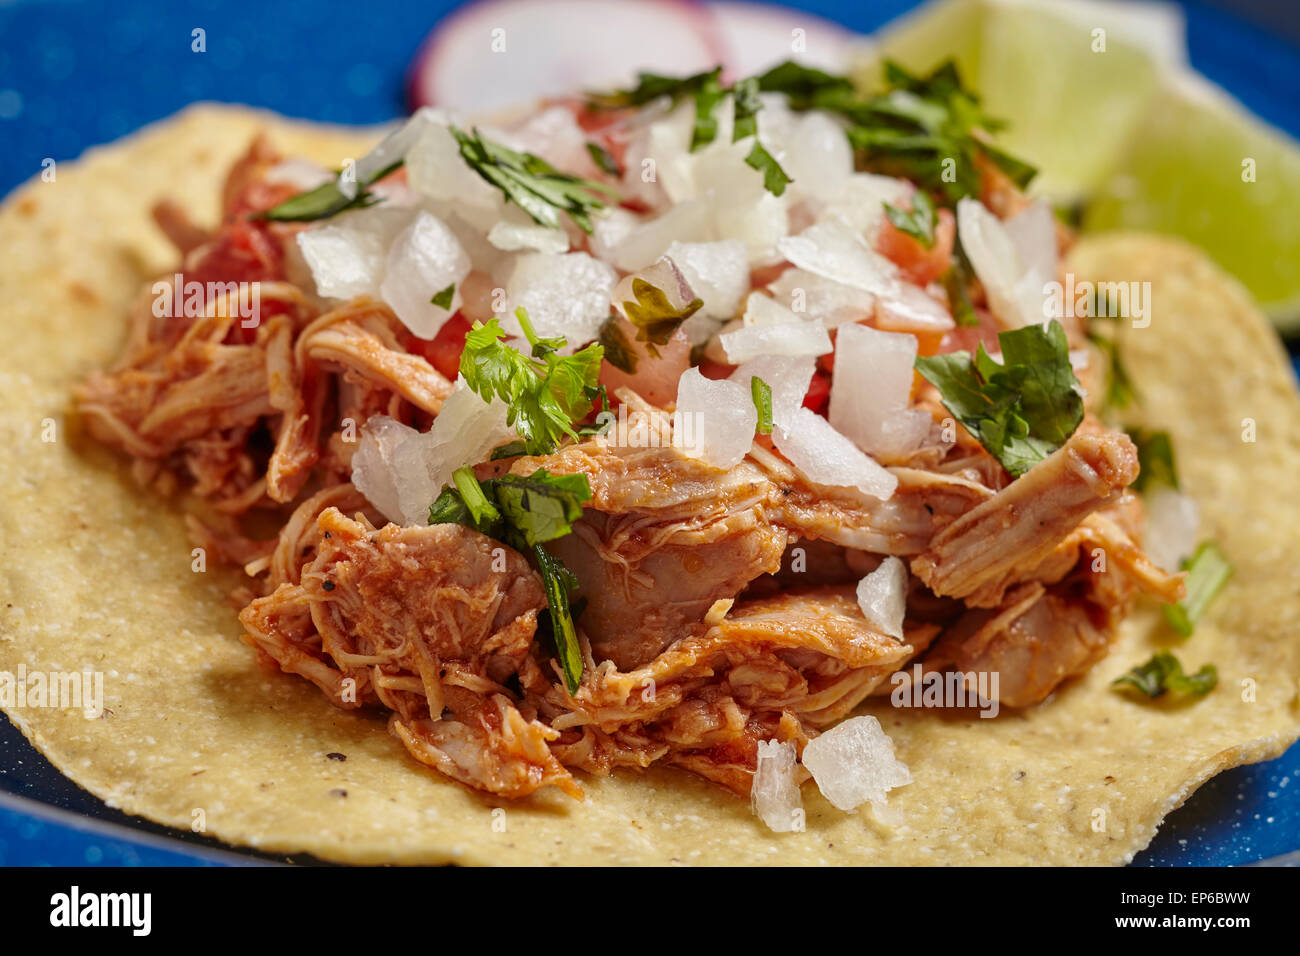 Shredded chicken tostada, a classic Mexican street food dish Stock Photo